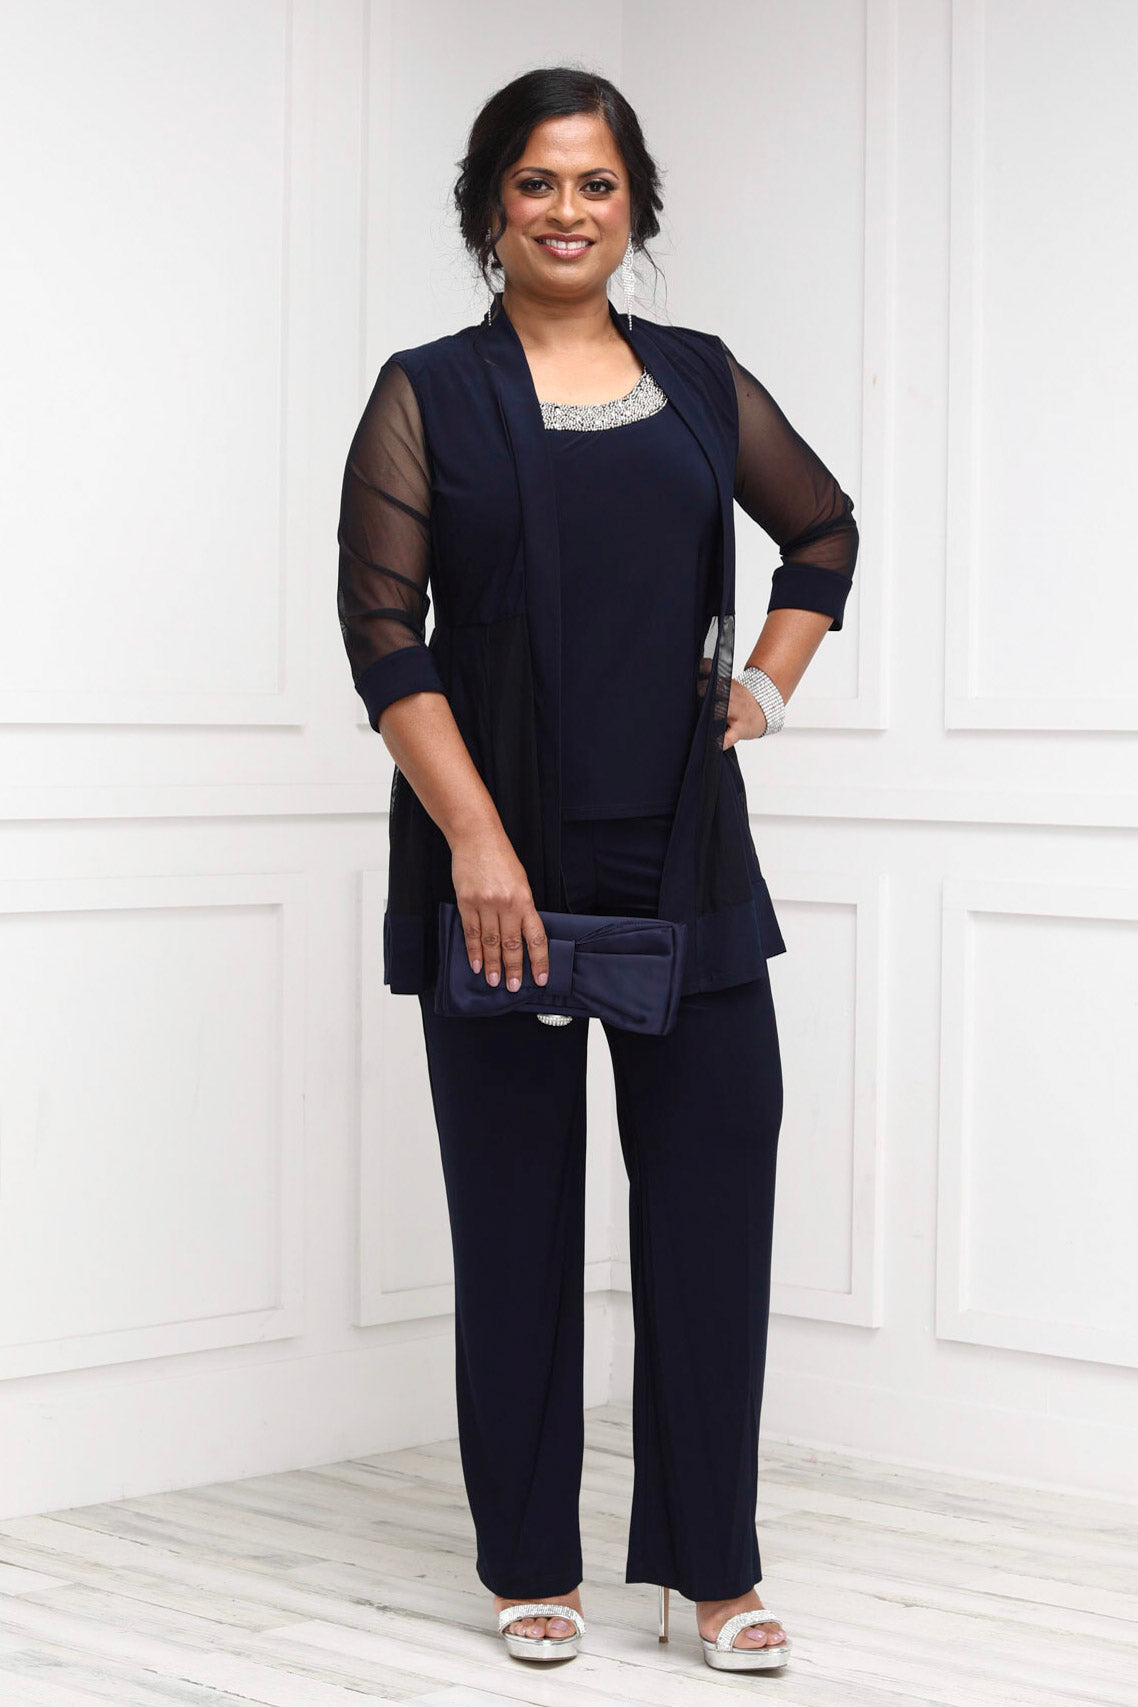 Purchase 2-Piece Ru0026M Richards Pant Suit for Women - SleekTrends